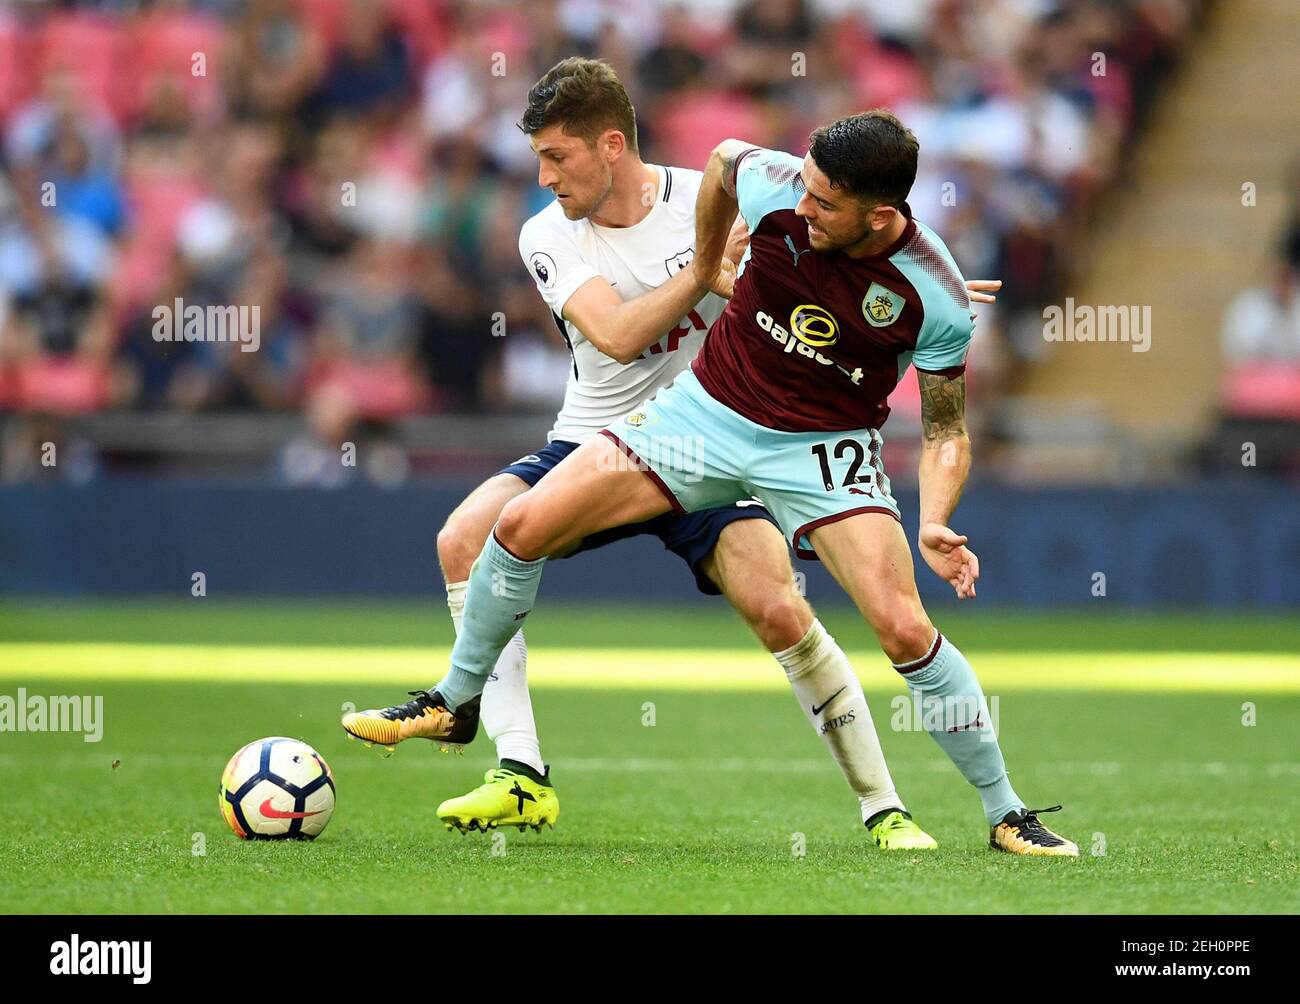 Soccer Football - Premier League - Tottenham Hotspur vs Burnley - London, Britain - August 27, 2017   Burnley's Robbie Brady in action with Tottenham's Ben Davies    REUTERS/Dylan Martinez    EDITORIAL USE ONLY. No use with unauthorized audio, video, data, fixture lists, club/league logos or 'live' services. Online in-match use limited to 45 images, no video emulation. No use in betting, games or single club/league/player publications. Please contact your account representative for further details. Stock Photo